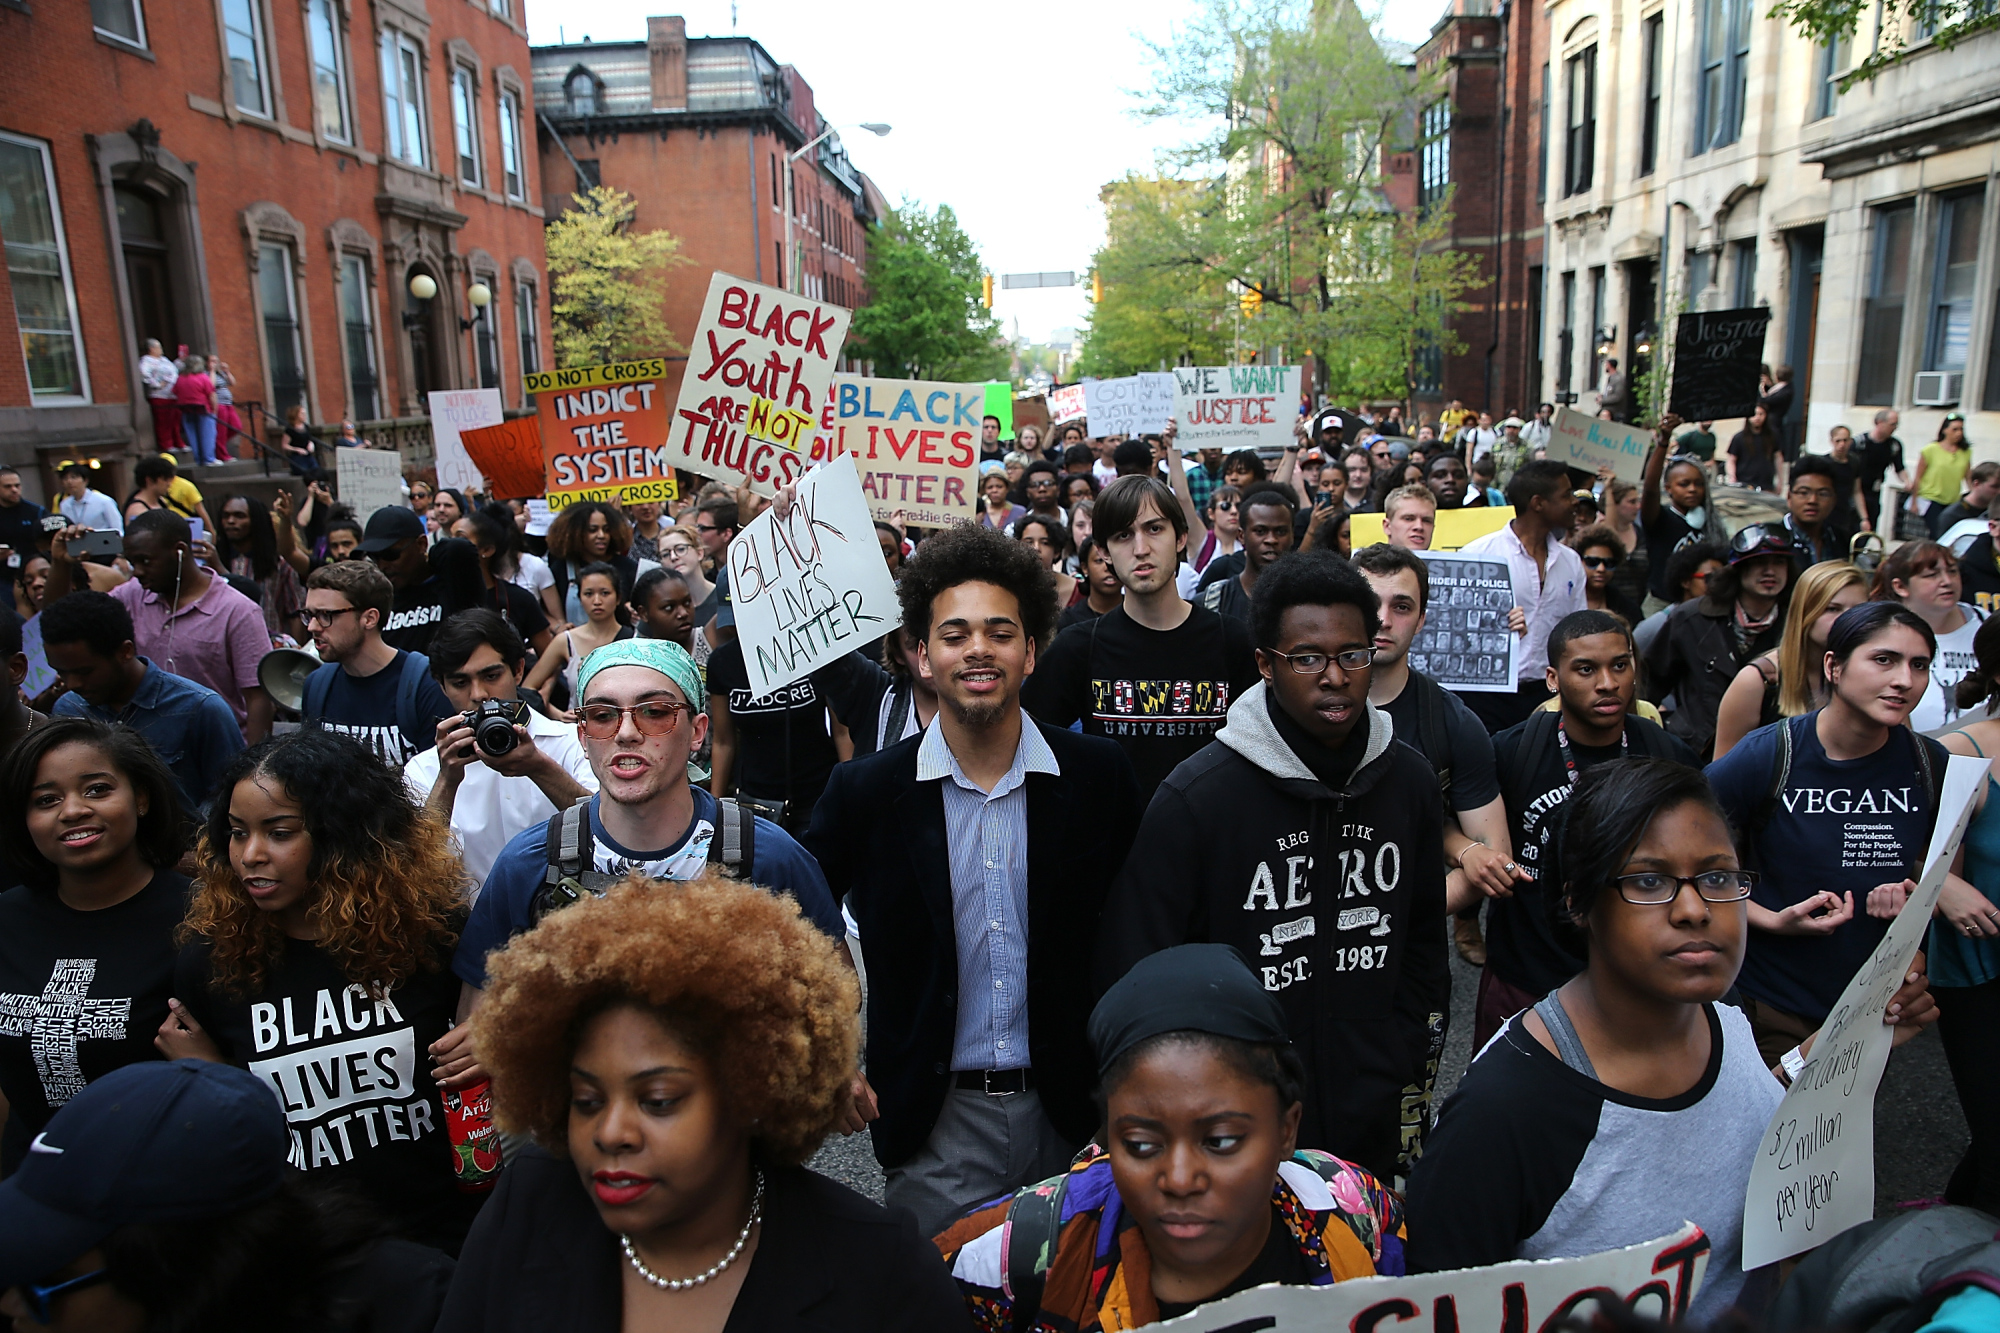 Protest And Violence In Baltimore An Integral View The Daily Evolver